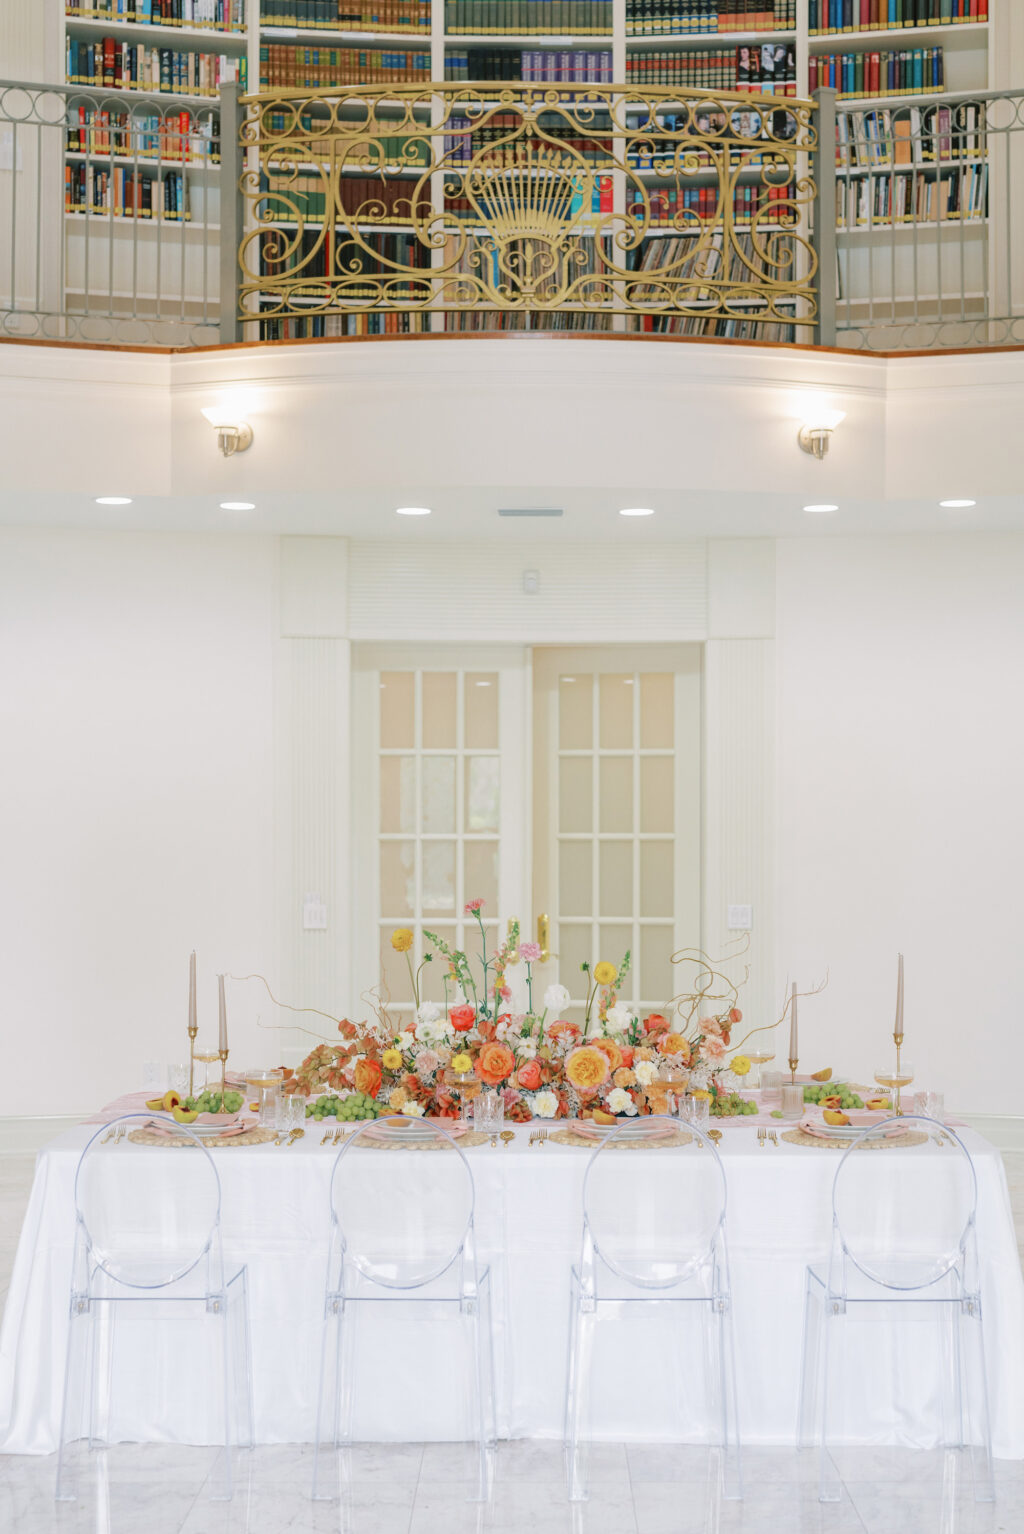 Romantic Modern Wedding Reception Ideas with Ghost Chairs and Peach Spring Floral Centerpieces | Neoclassical Architectural Tarpon Springs Wedding Venue Whitehurst Gallery